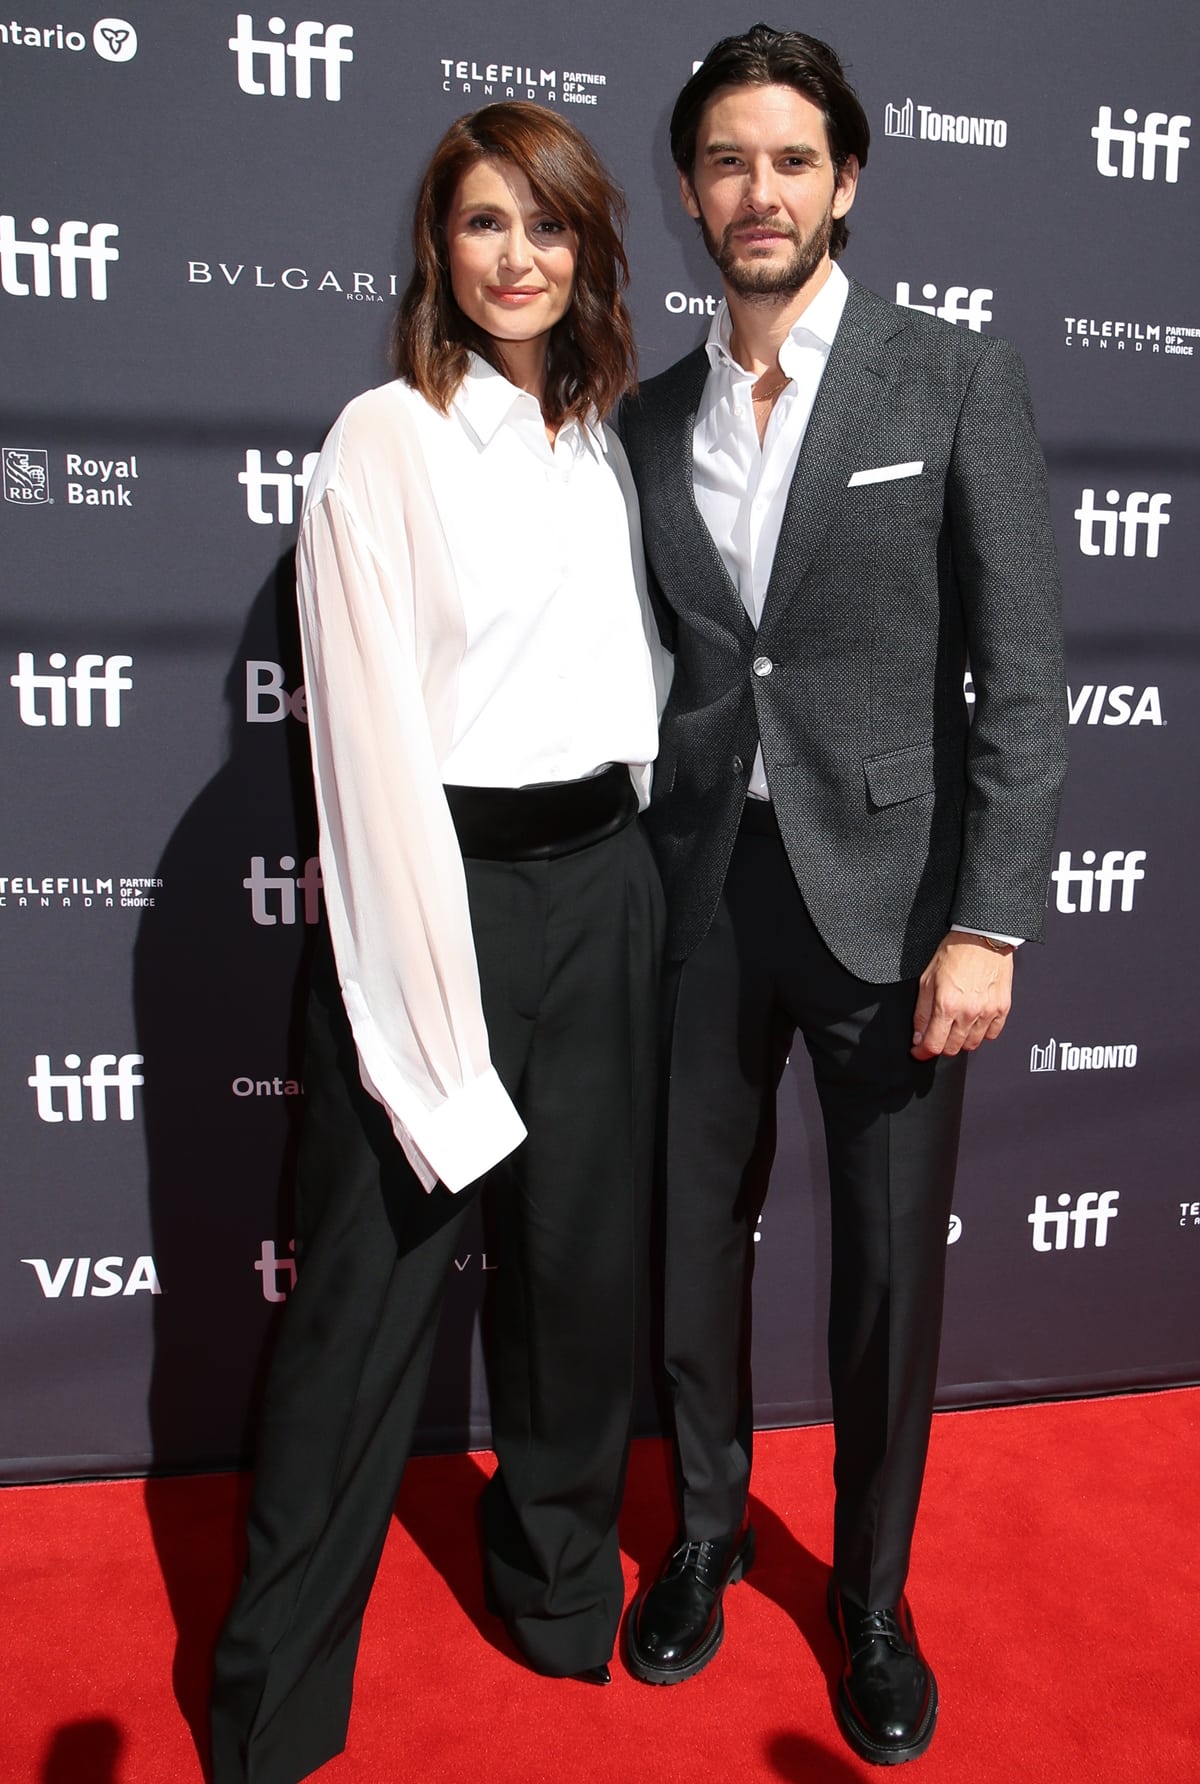 On September 11, 2023, at the Toronto International Film Festival, Gemma Arterton, standing at 5ft 7 (170.2 cm), and Ben Barnes, with a height of 6ft 0 (182.9 cm), attended 